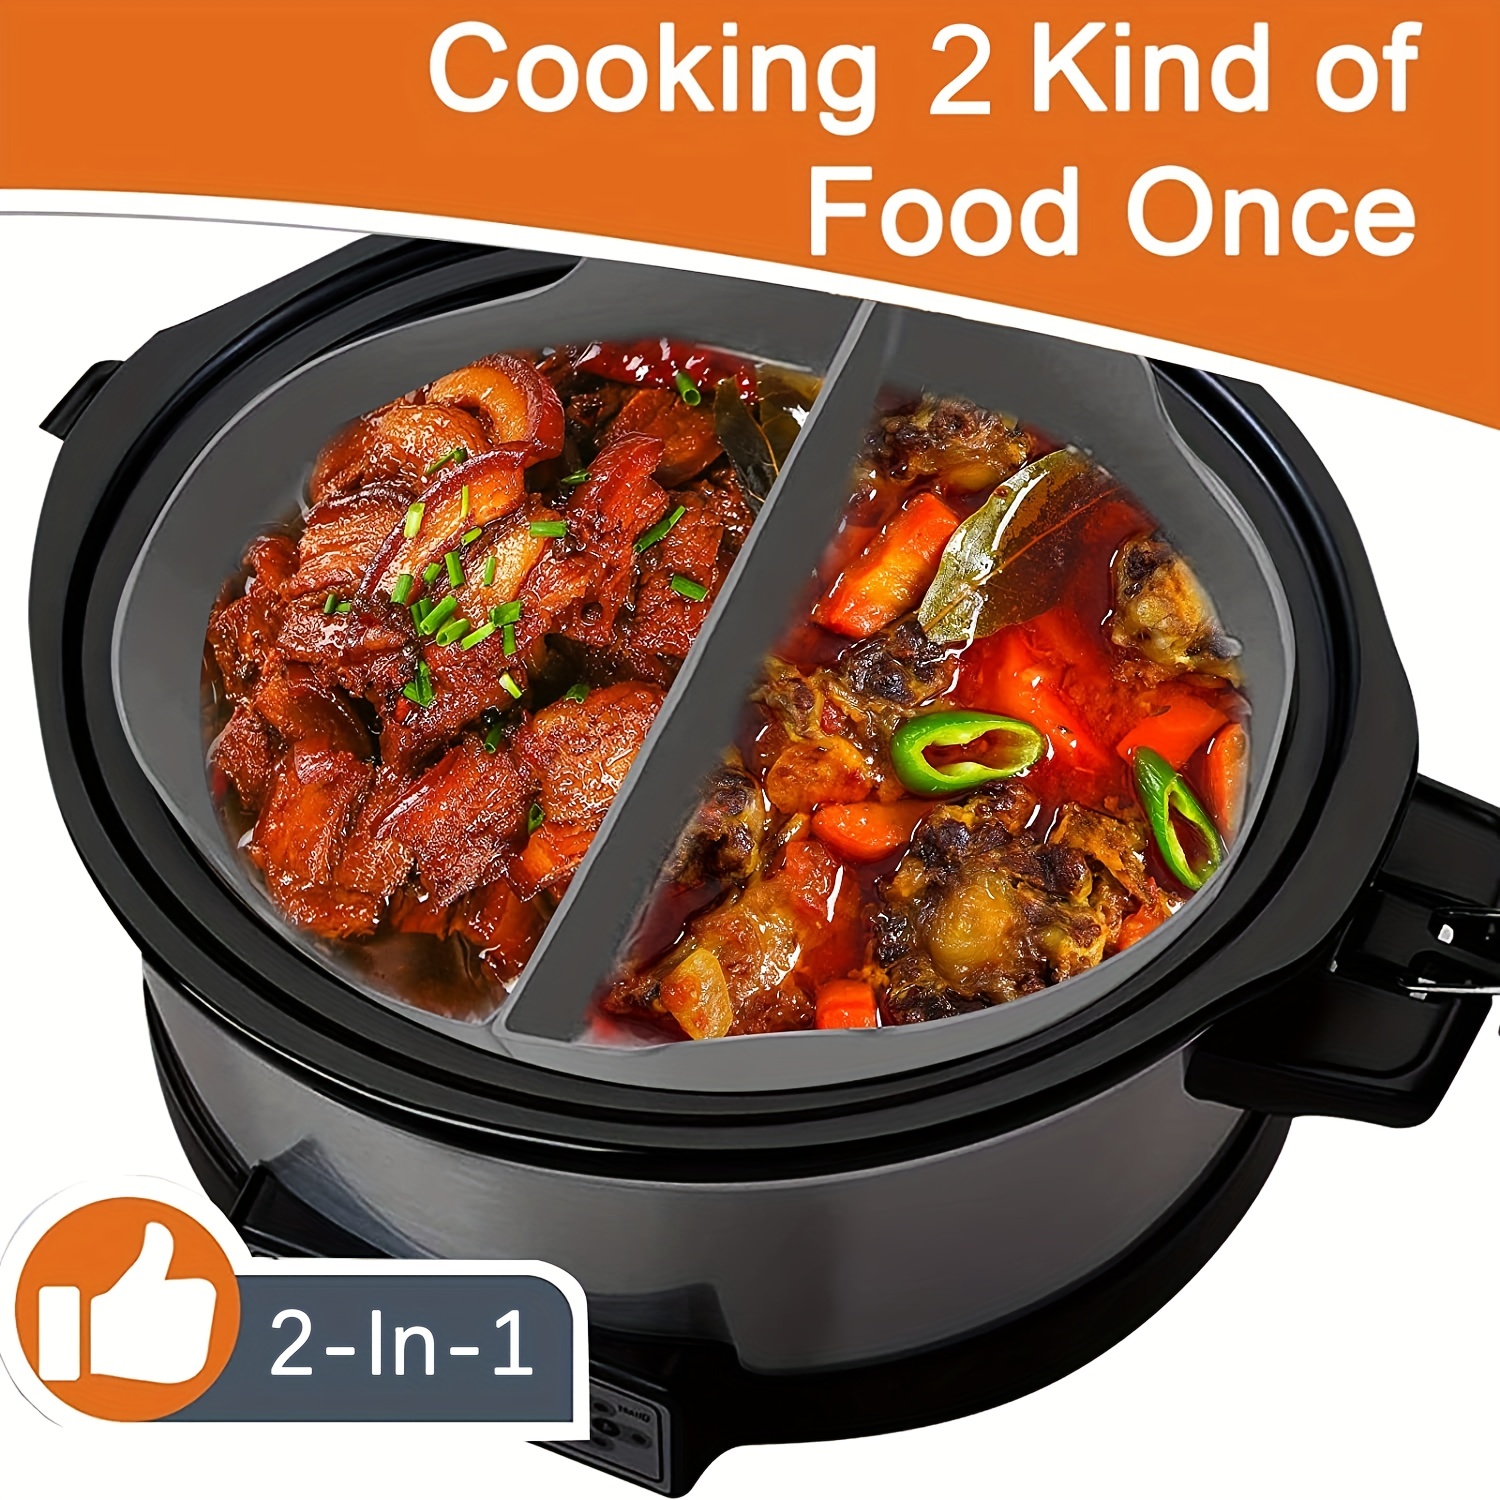 ONEBOM Silicone Slow Cooker Liners fit Crock-Pot 6 Quart Oval Slow